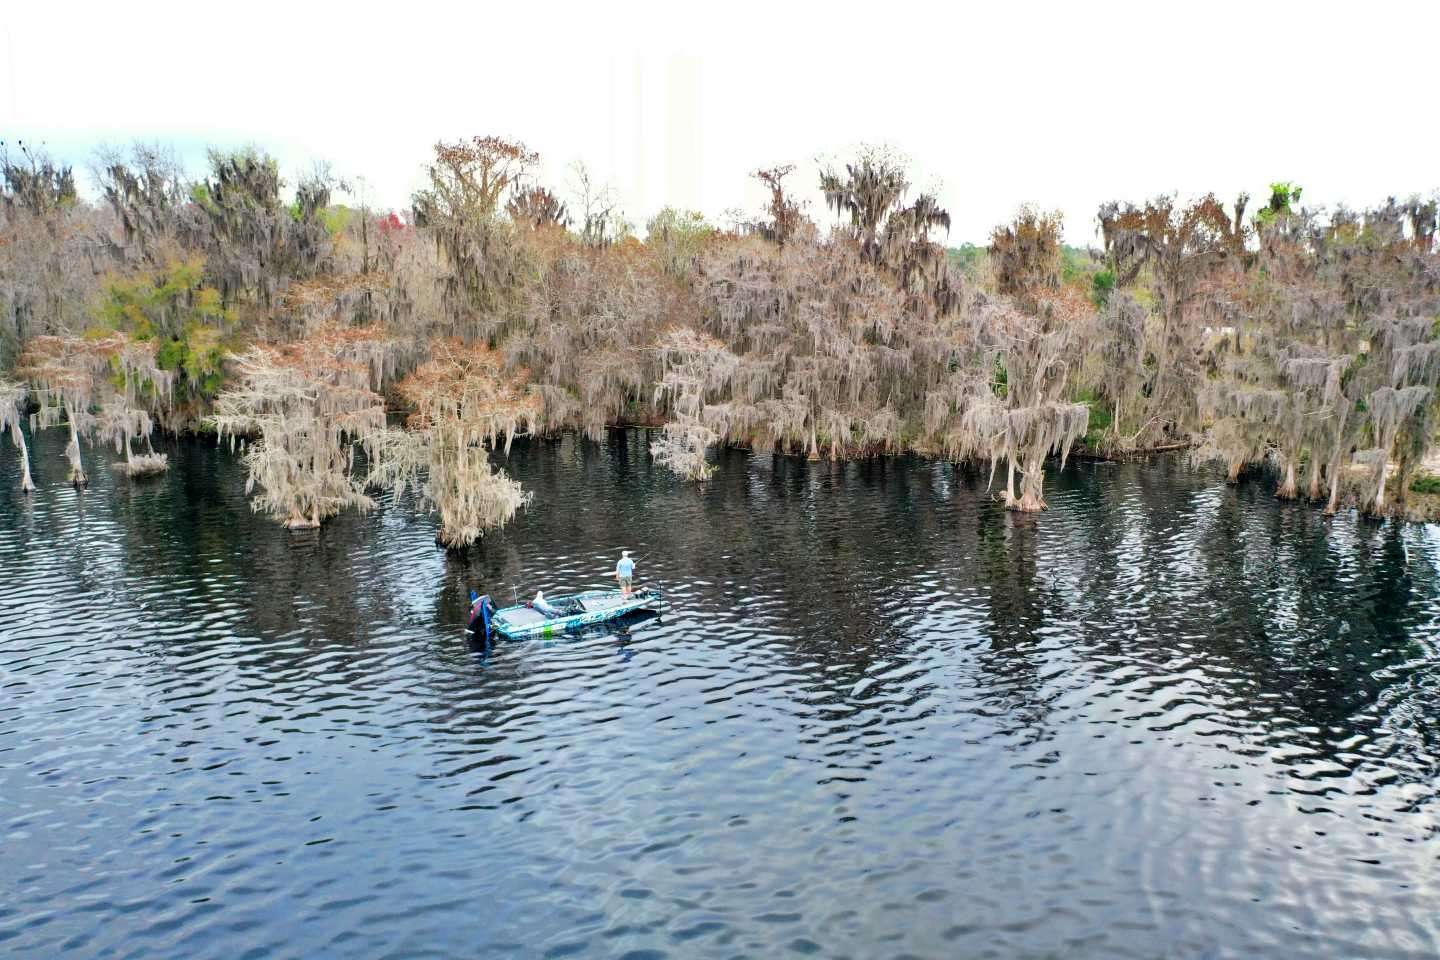 Crescent, and elsewhere in this part of the river, has cypress trees with knees and extended roots that provide ideal bass habitat. 